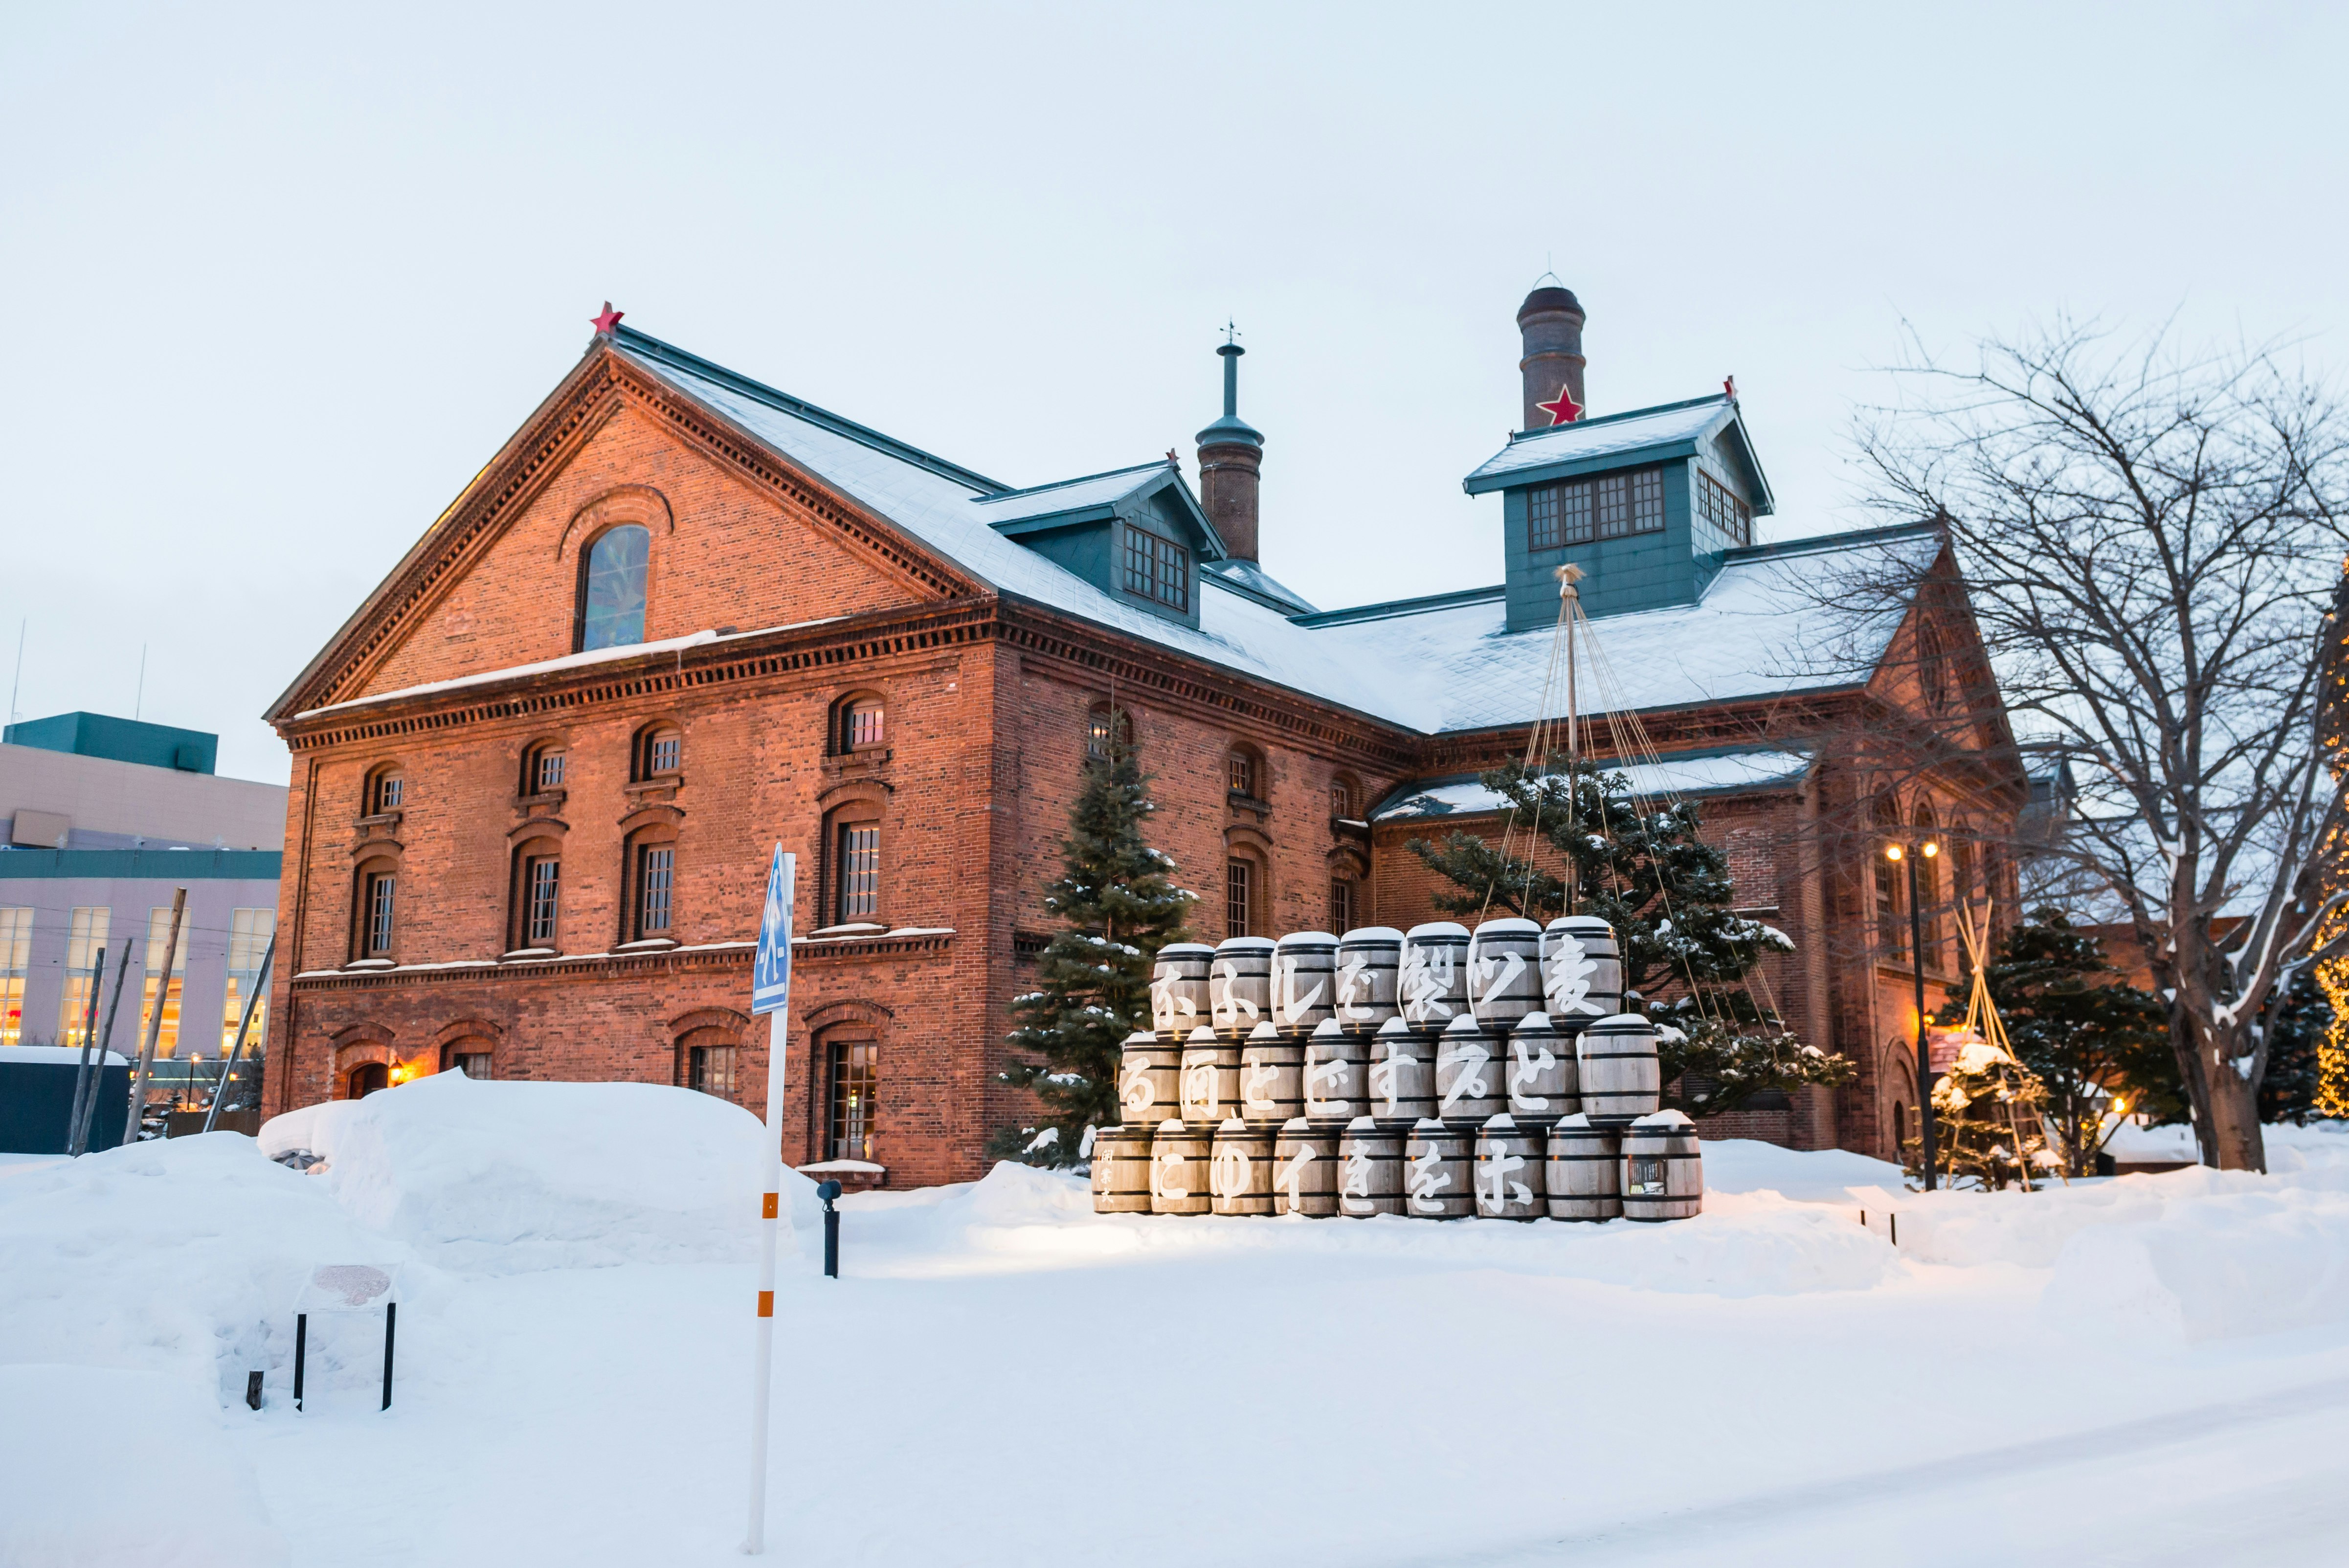 Sapporo Biergarten in Hokkaido, housed in an old brick factory surrounded by snow, with snow-dusted beer barrels outside.